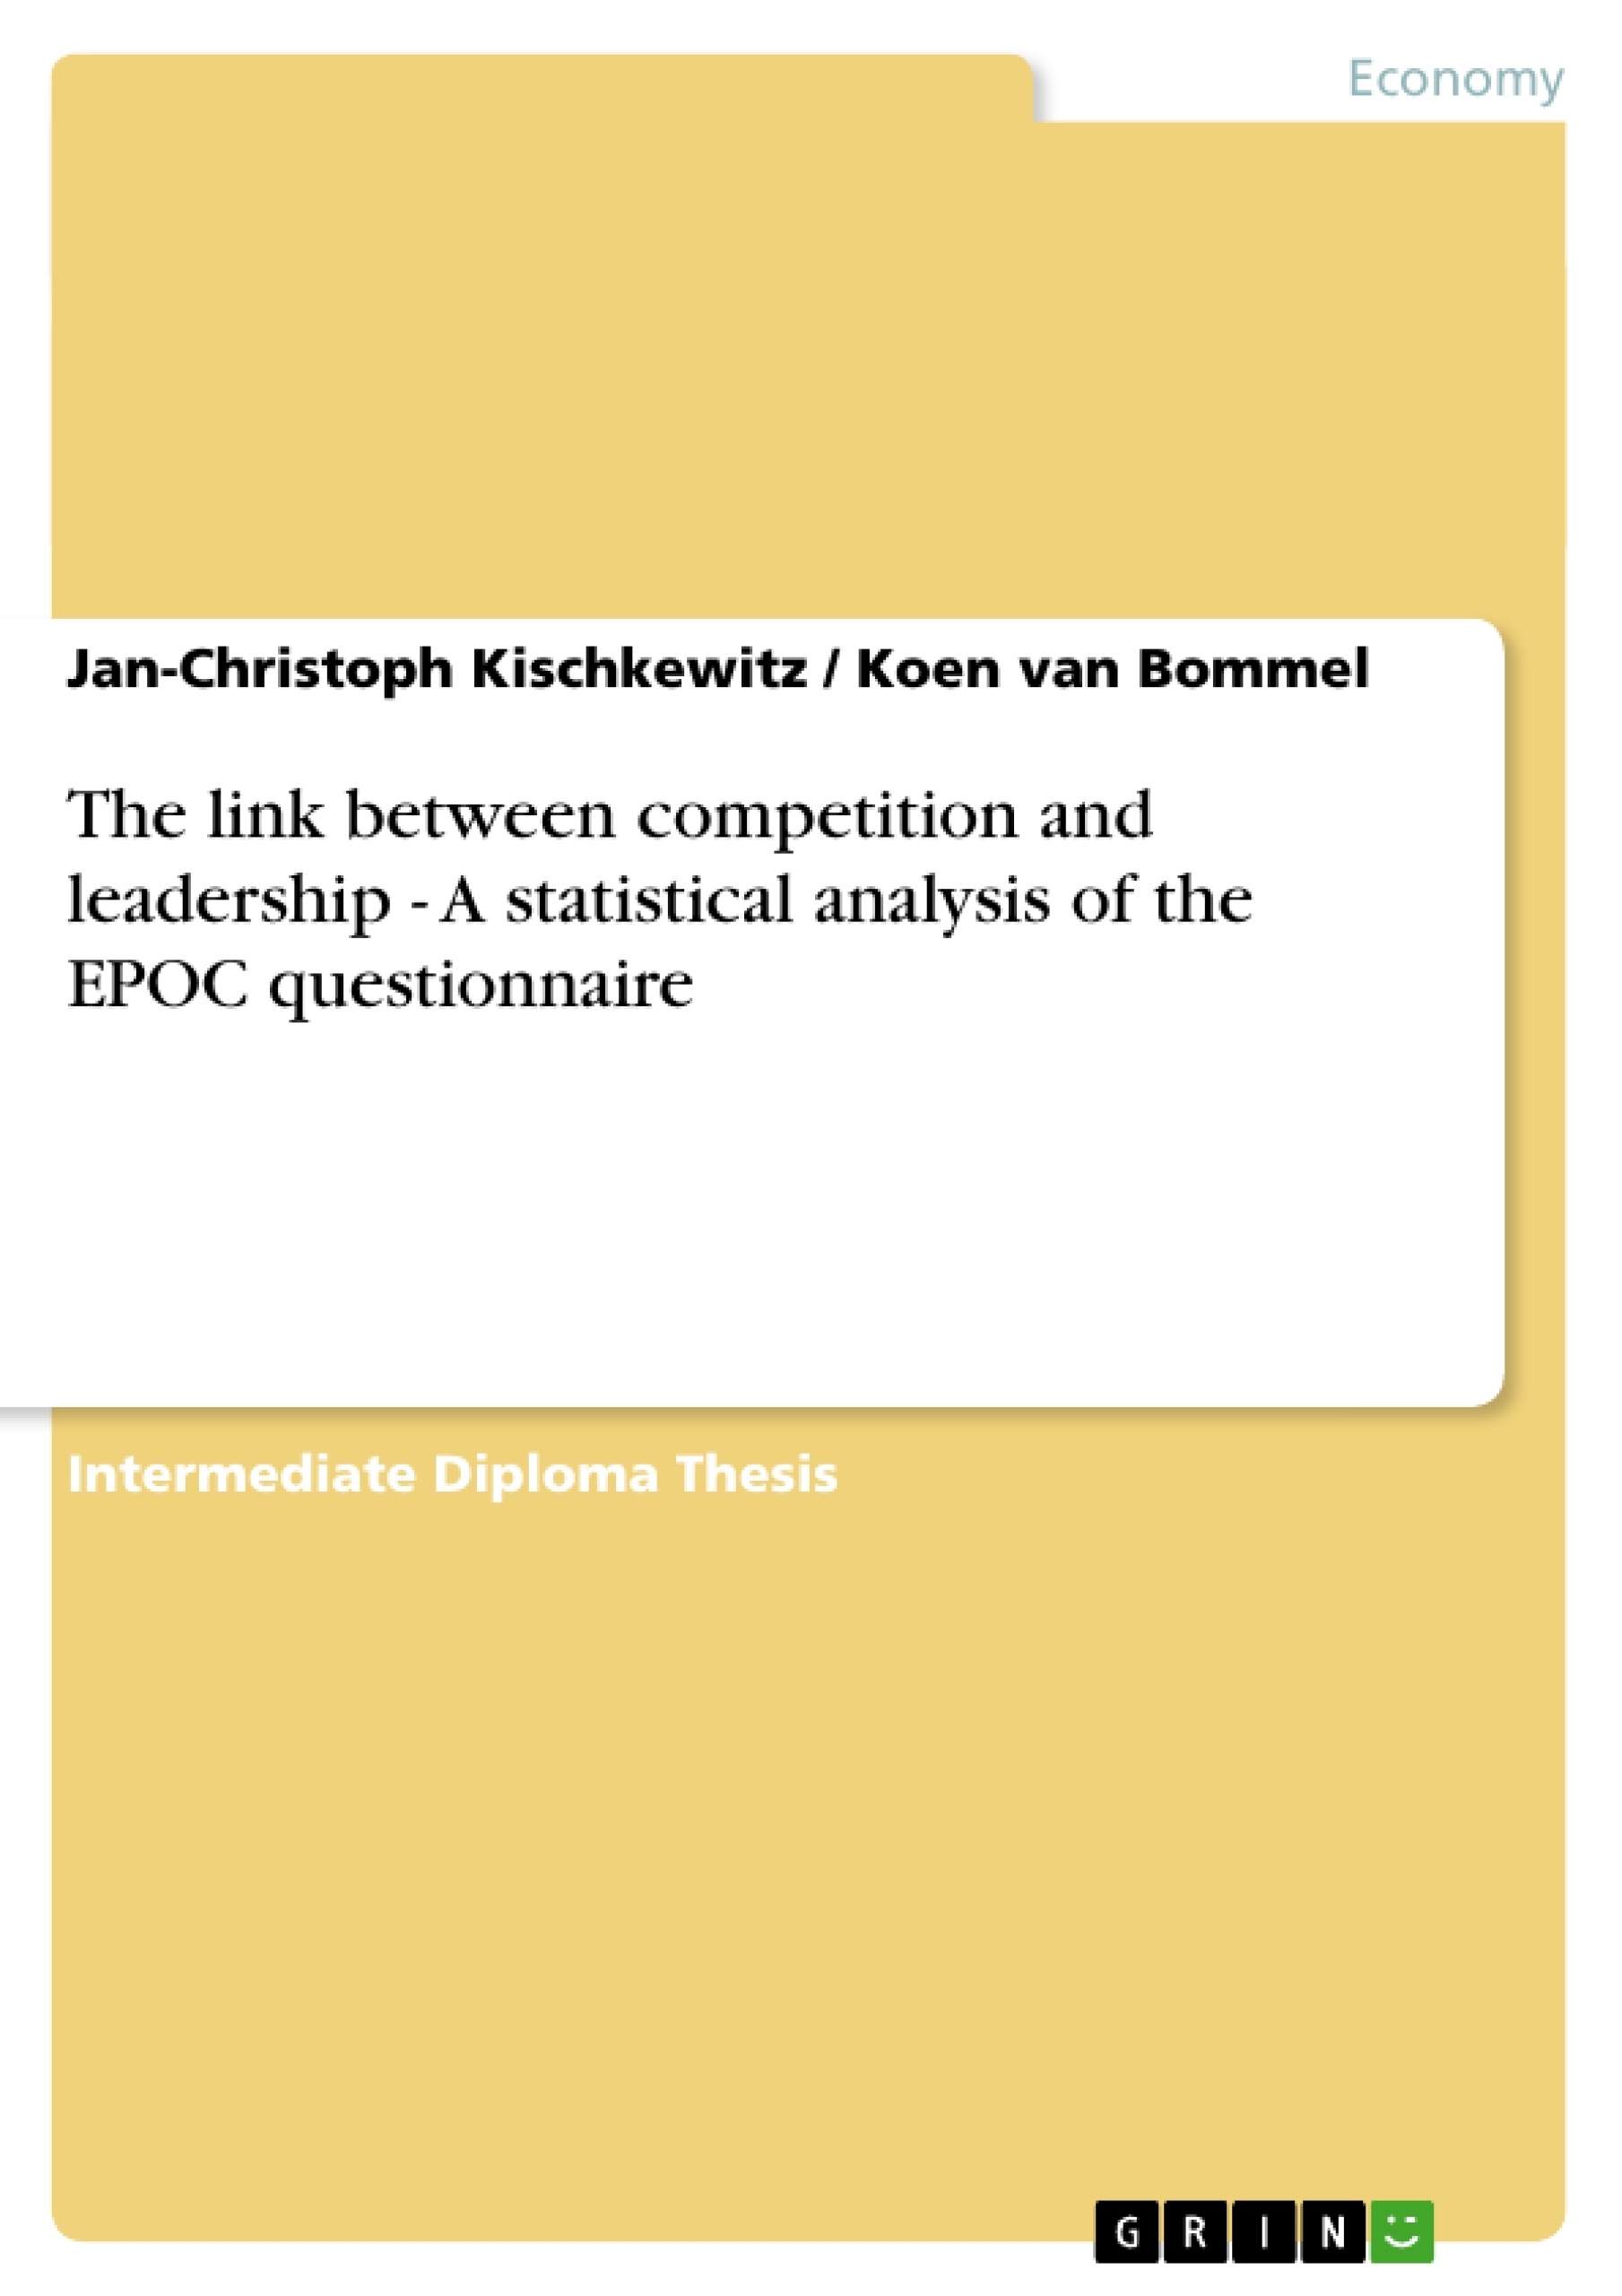 Título: The link between competition and leadership - A statistical analysis of the EPOC questionnaire